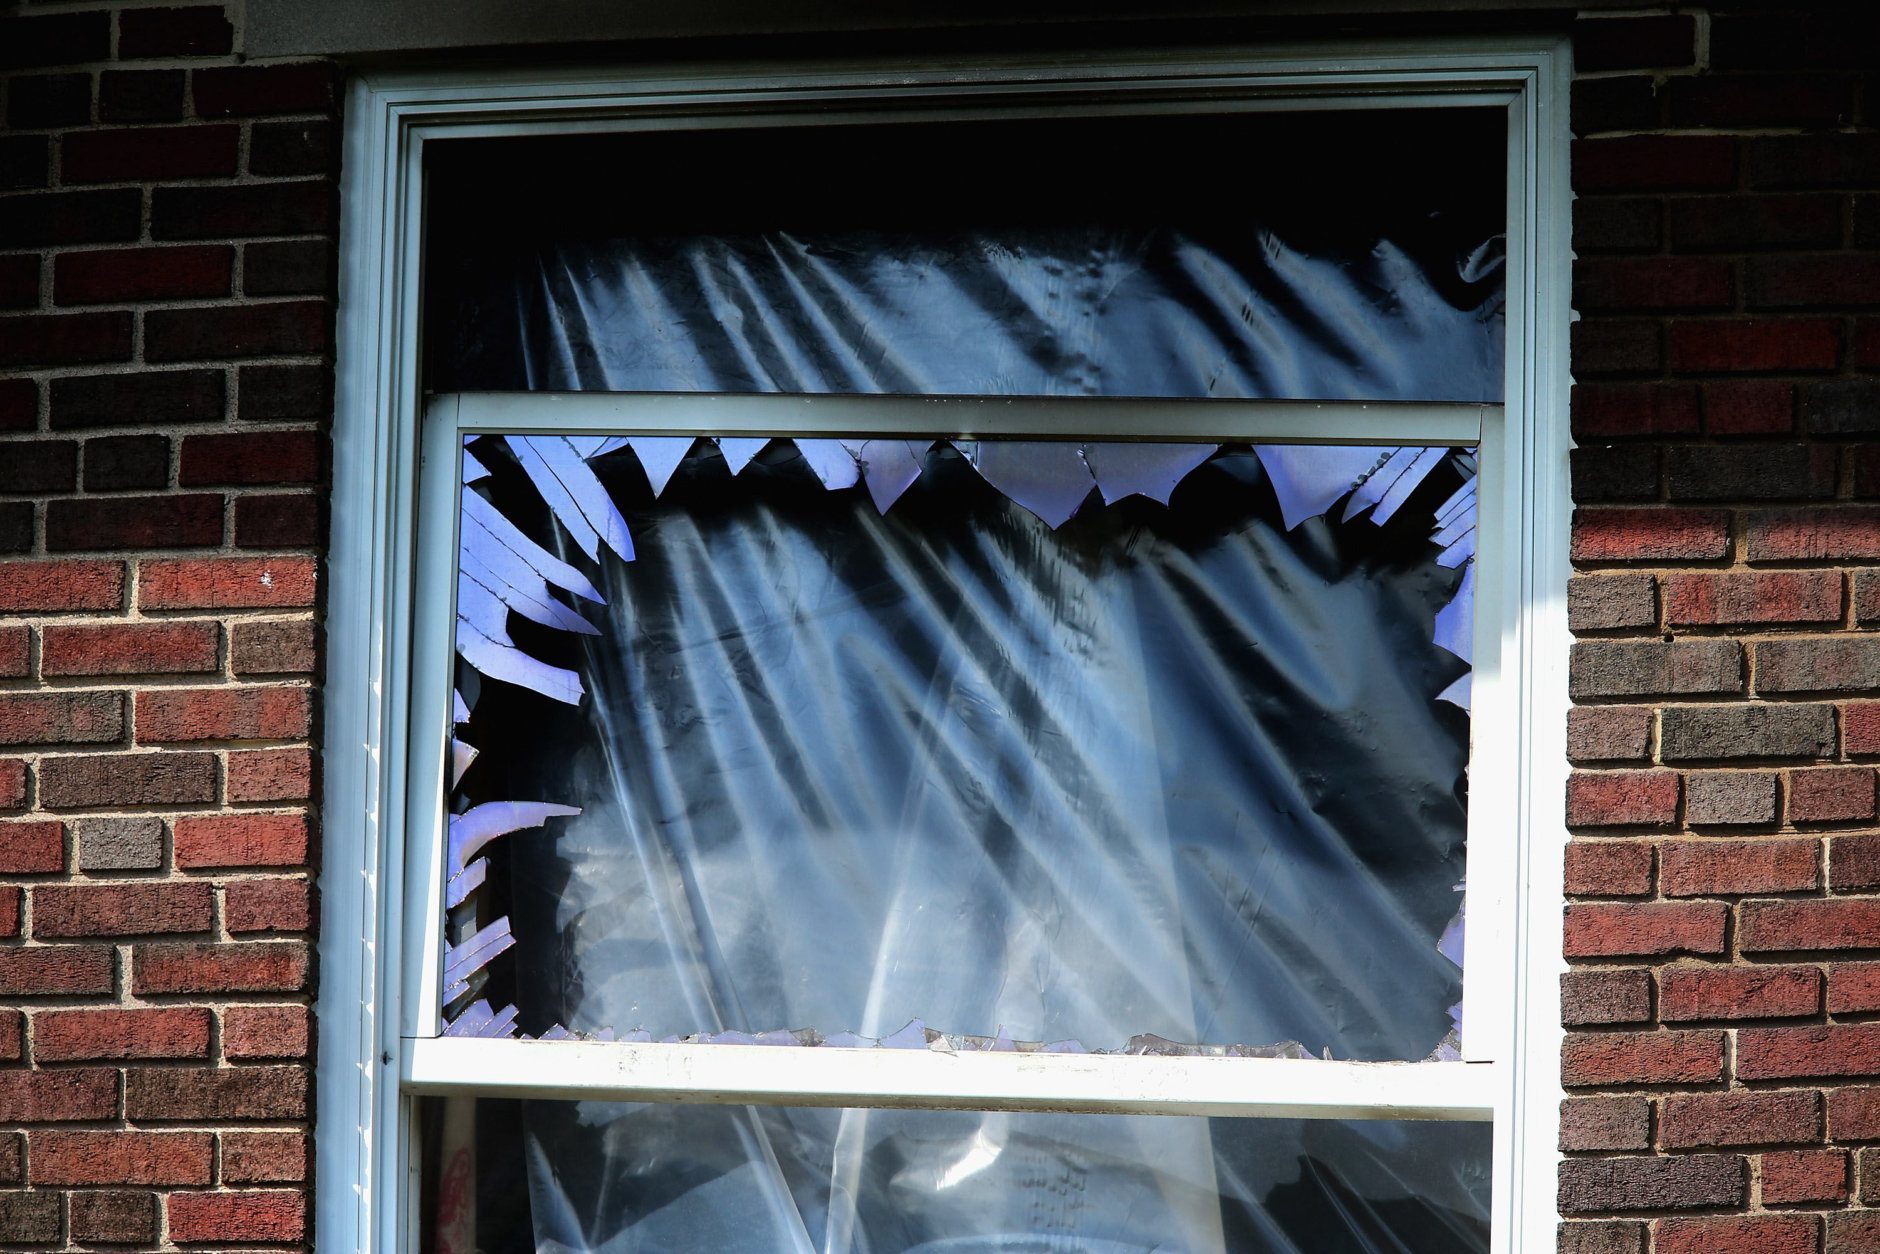 WASHINGTON, DC - MAY 19:  Smashed windows and heavy fire damage scar a house on the 3200 block of Woodland Drive NW May 19, 2015 in Washington, DC. Firefighters discovered the bodies of Savvas Savopoulos, 46, his wife Amy, 47, their 10-year-old son Philip, and the housekeeper, Veralicia Figueroa, 57, last Thursday afternoon when they responded to a blaze at the house. Two Savopoulos daughters were away in boarding school at the time. Investigators have ruled the deaths homicides and say they could continue to collect evidence at the house for another week.  (Photo by Chip Somodevilla/Getty Images)